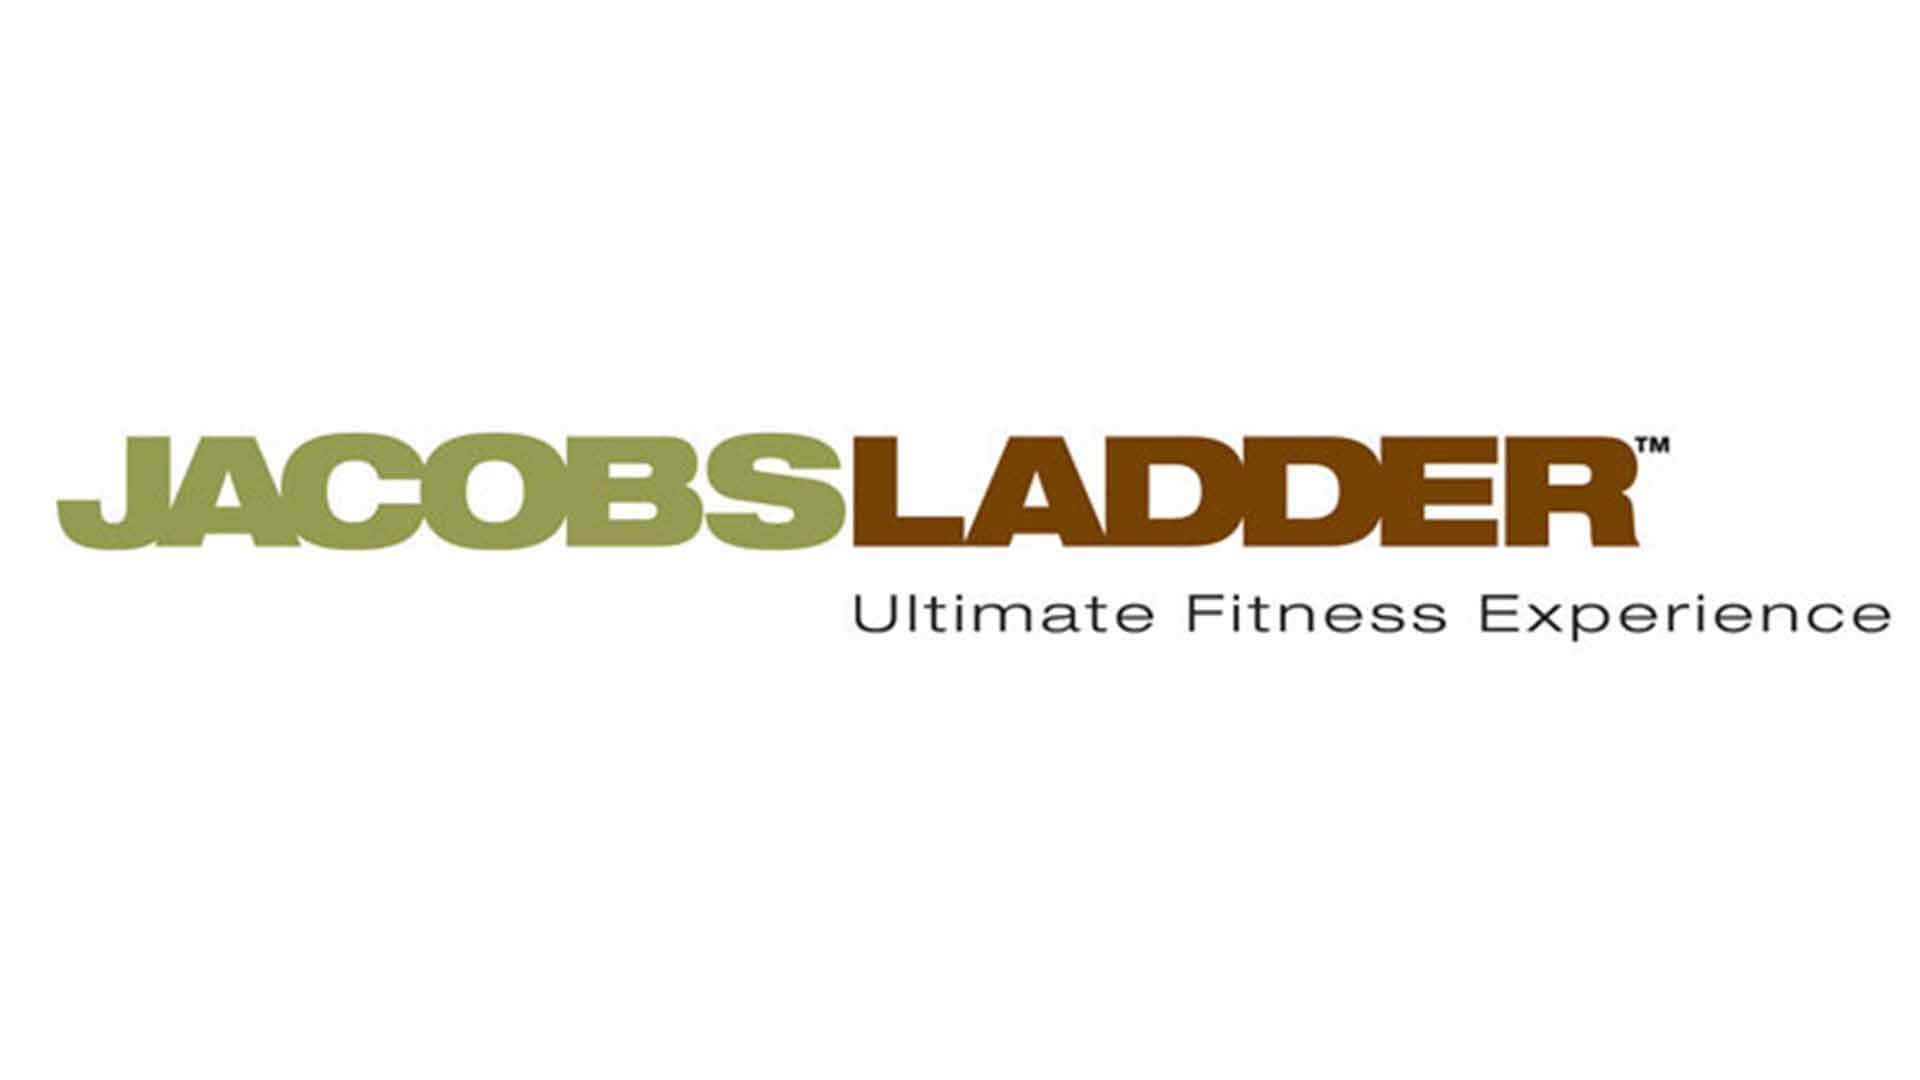 A logo of the ultimate fitness experience